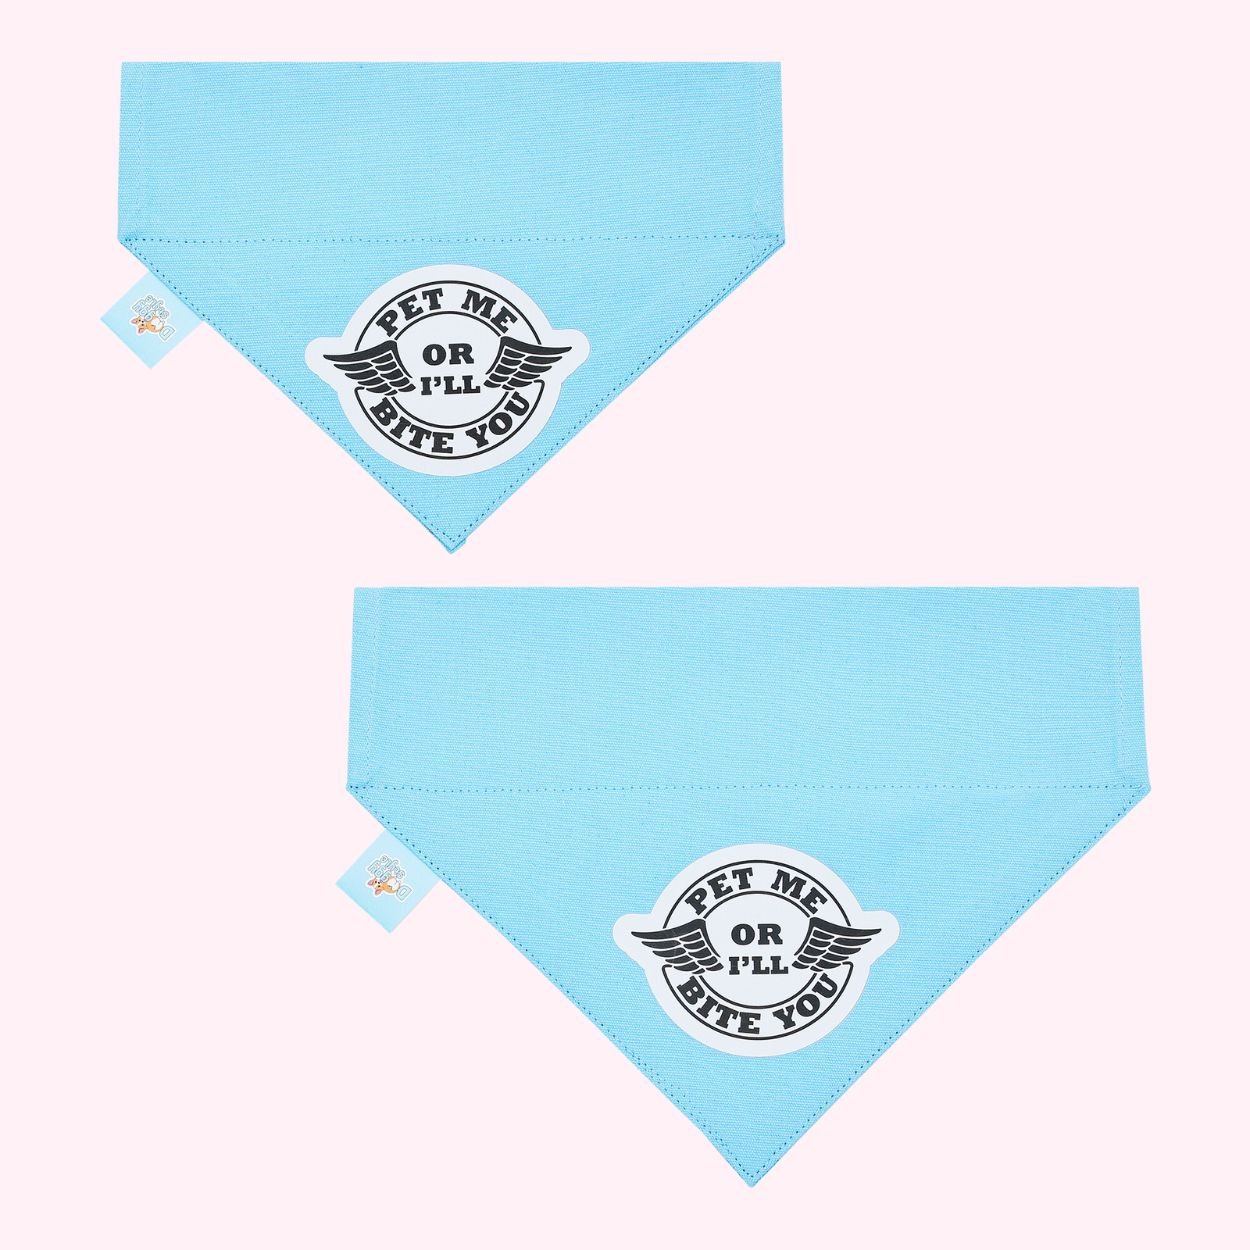 "Pet Me or I'll Bite You" Bandana - Doggy Style Pet Accessories